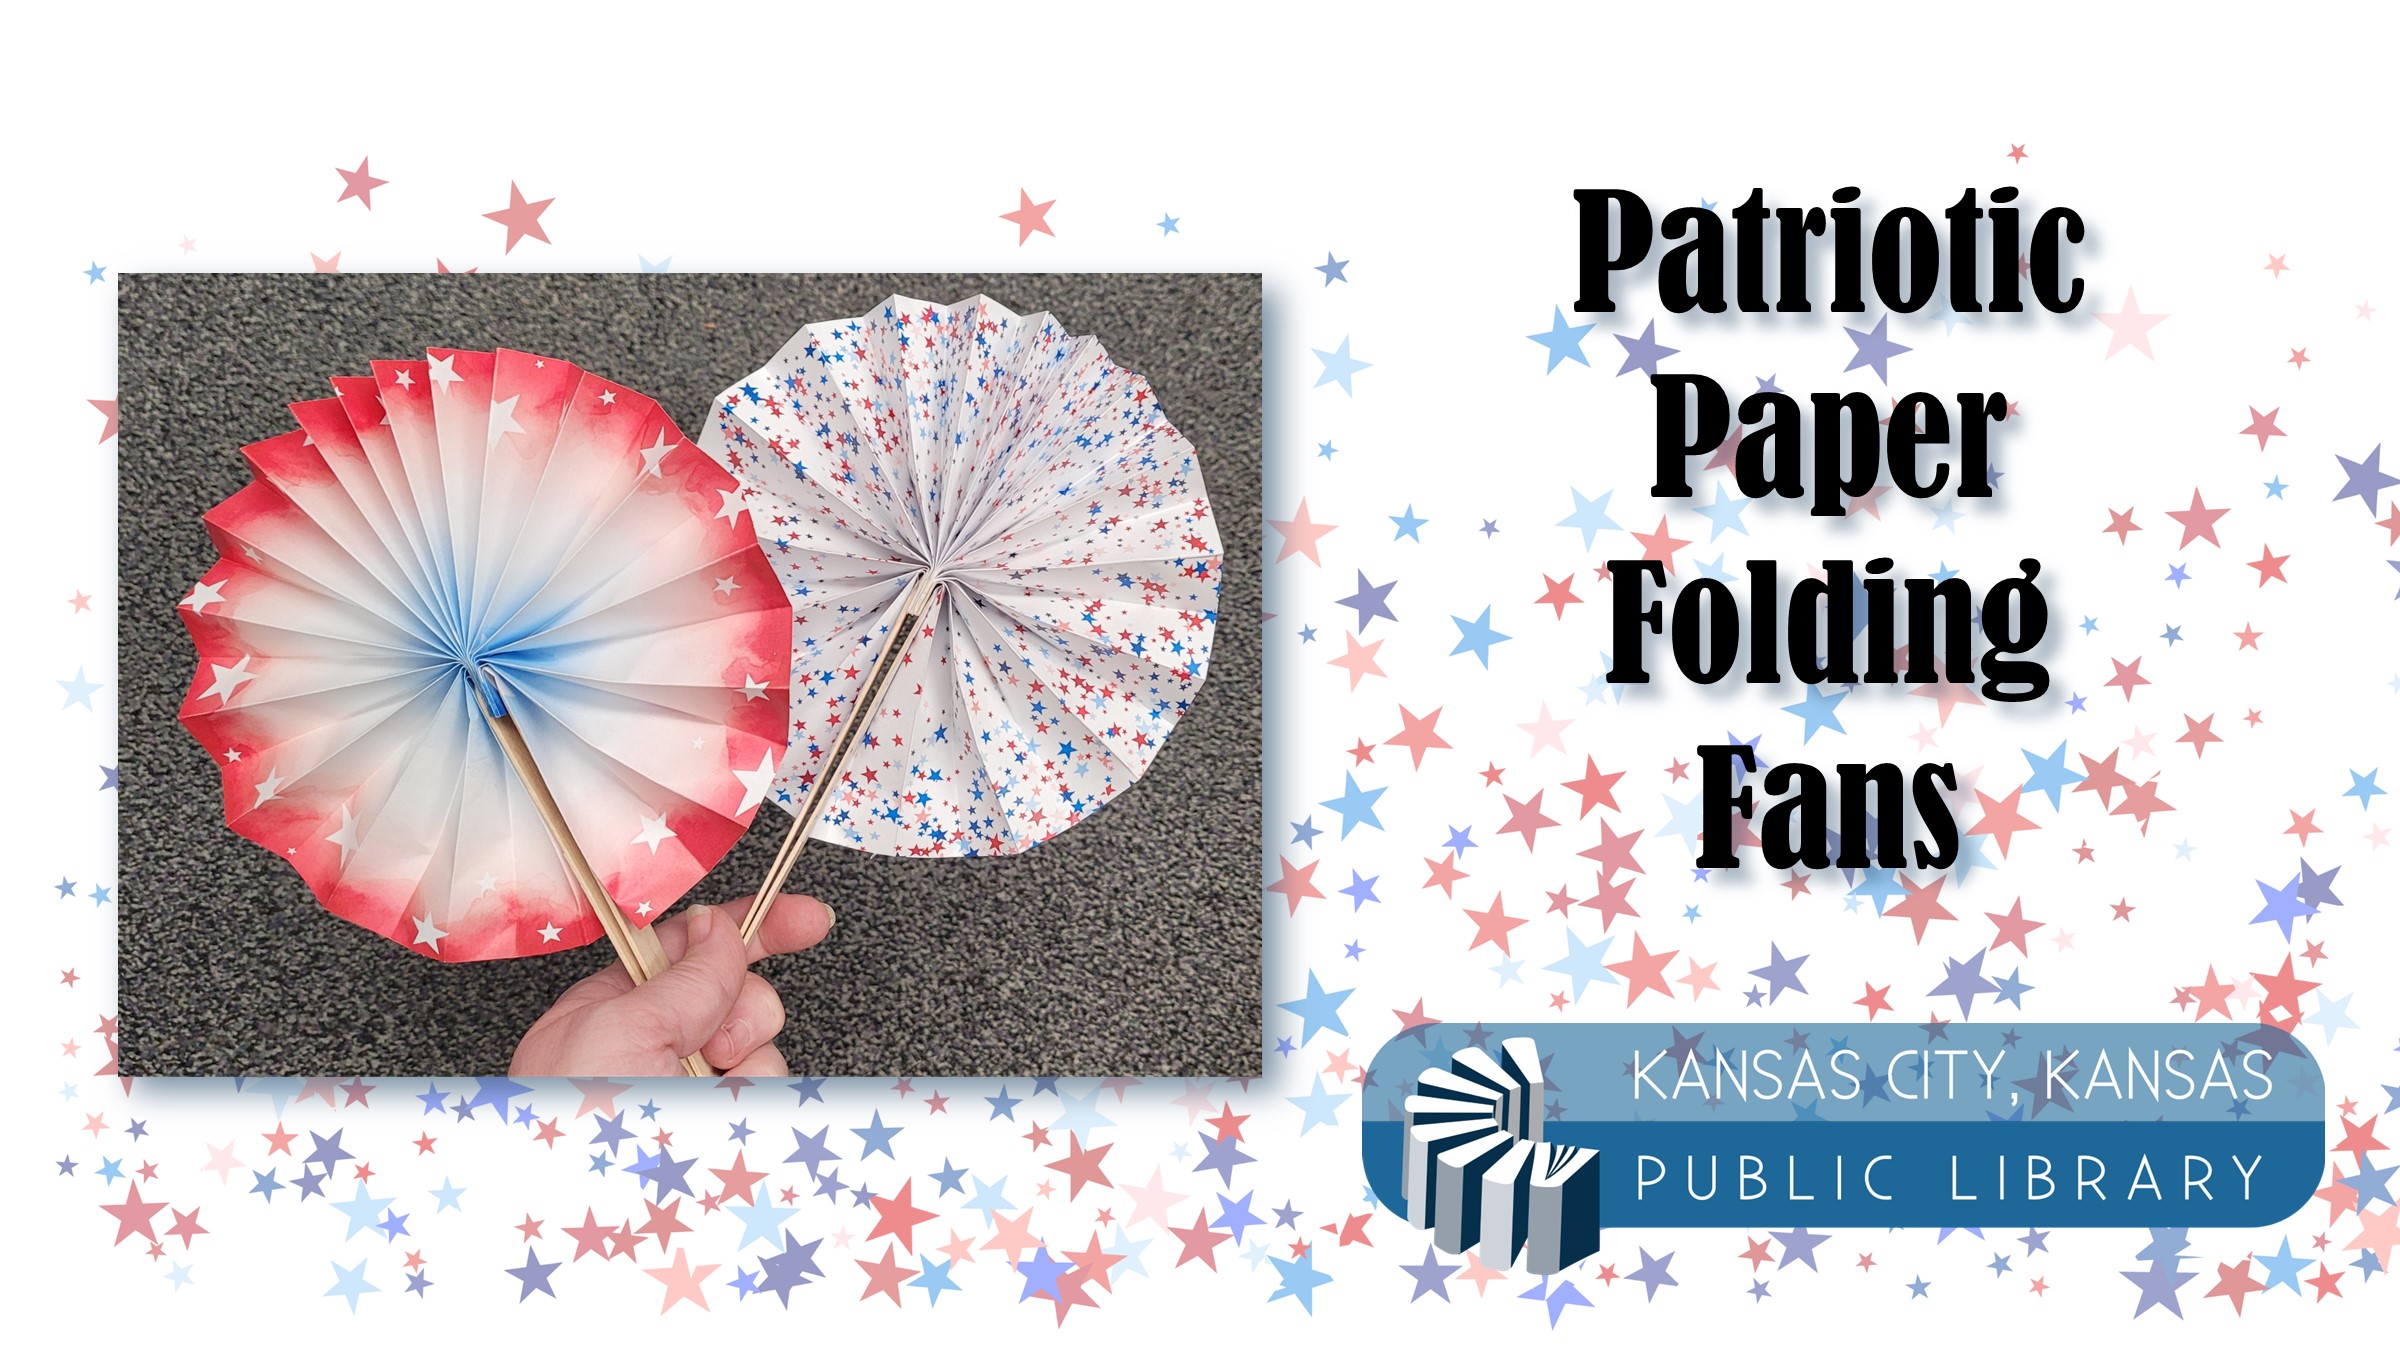 Red, white and blue paper folding fans on a starry background